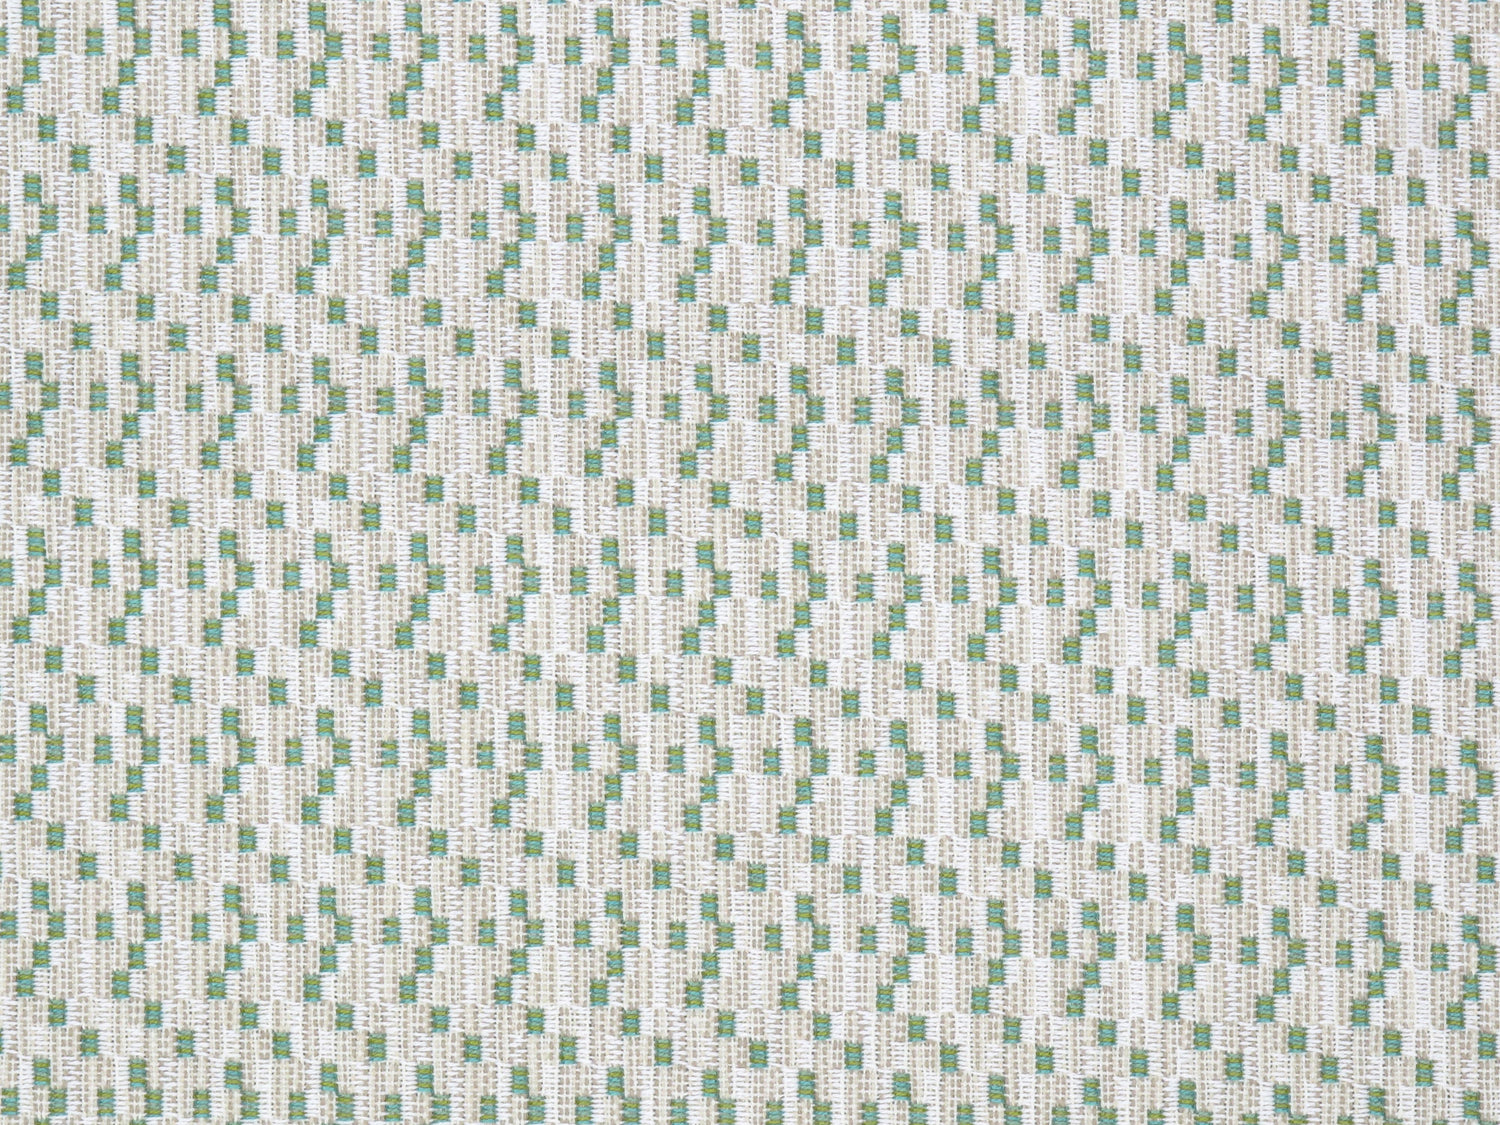 Norita fabric in leaf color - pattern number SU 00034597 - by Scalamandre in the Old World Weavers collection